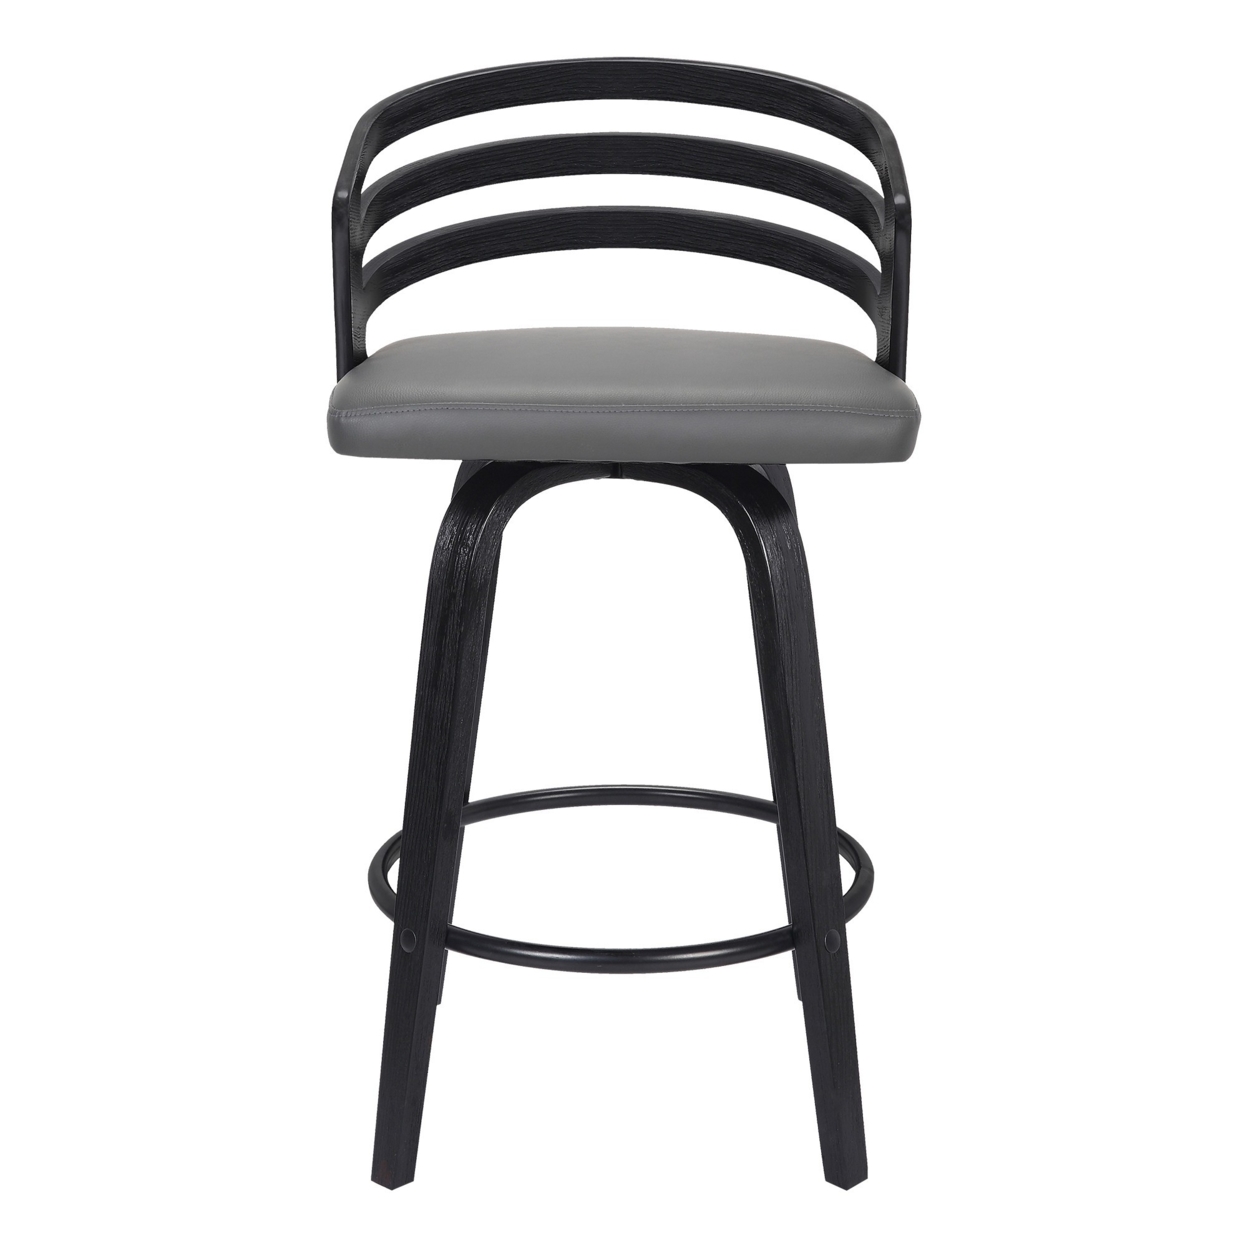 30 Inch Wooden And Leatherette Swivel Barstool, Gray And Black- Saltoro Sherpi